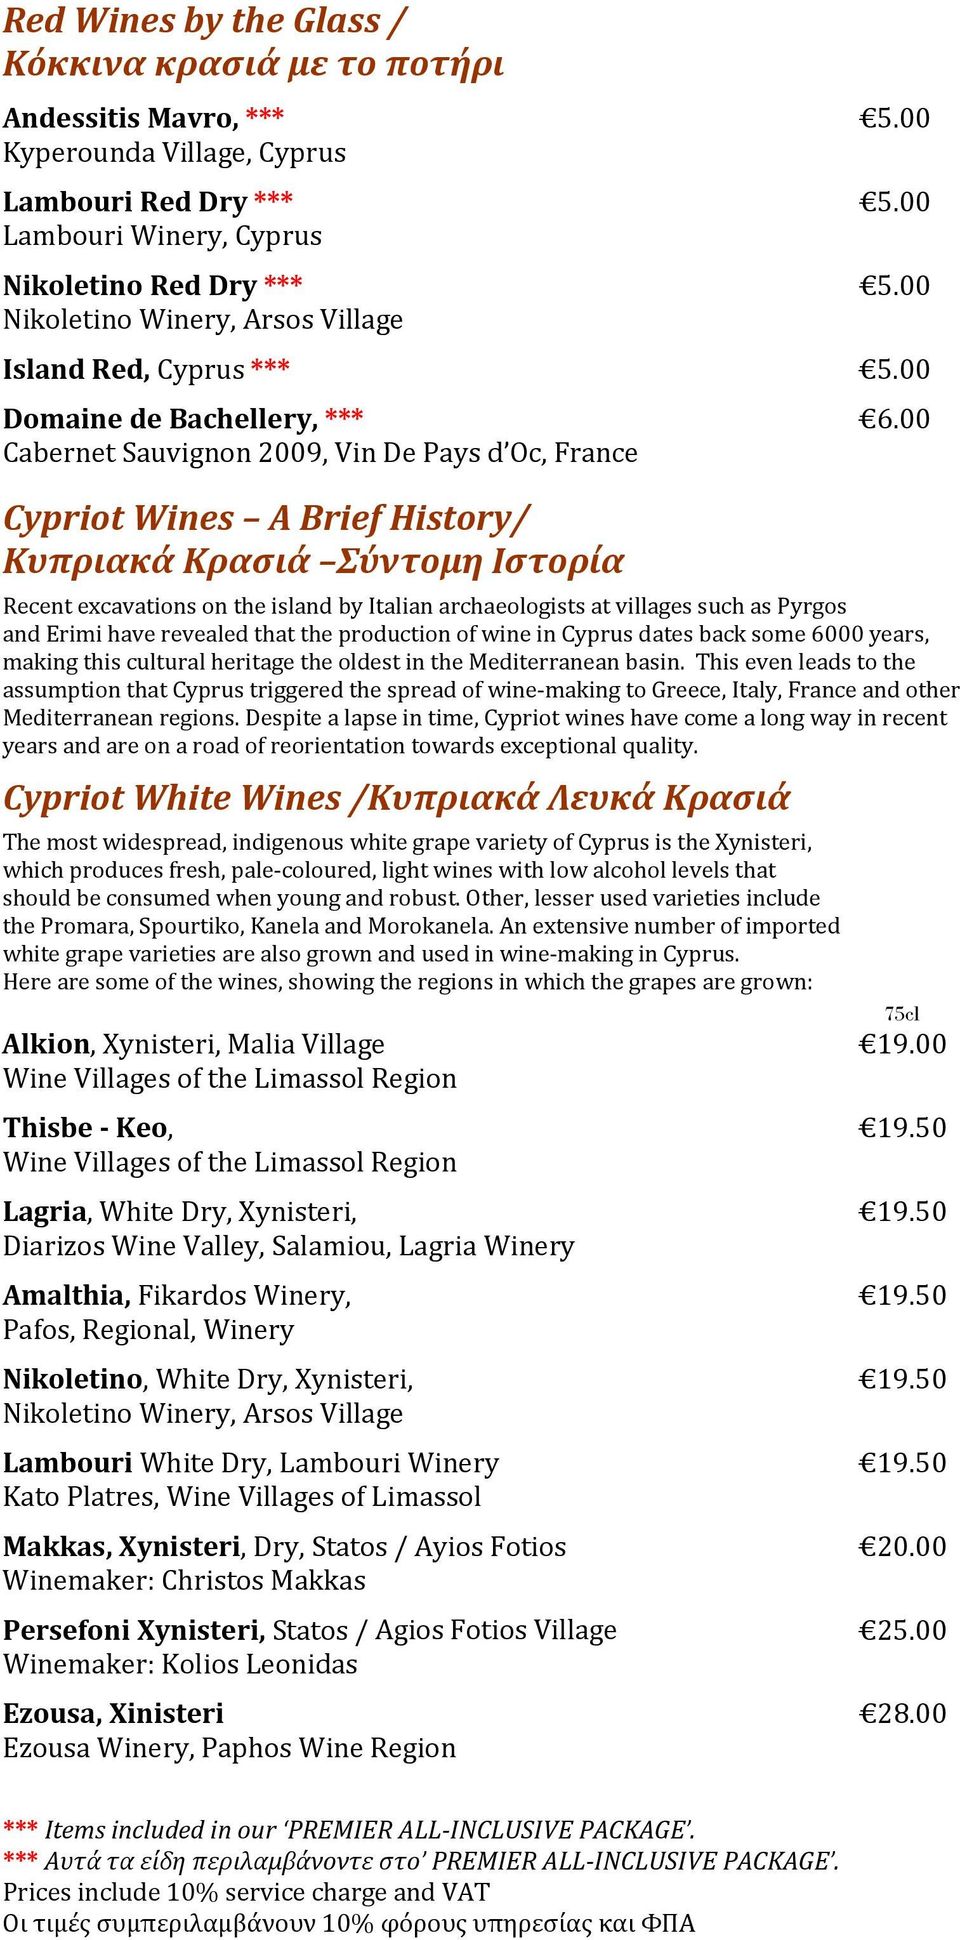 00 Recent excavations on the island by Italian archaeologists at villages such as Pyrgos and Erimi have revealed that the production of wine in Cyprus dates back some 6000 years, making this cultural